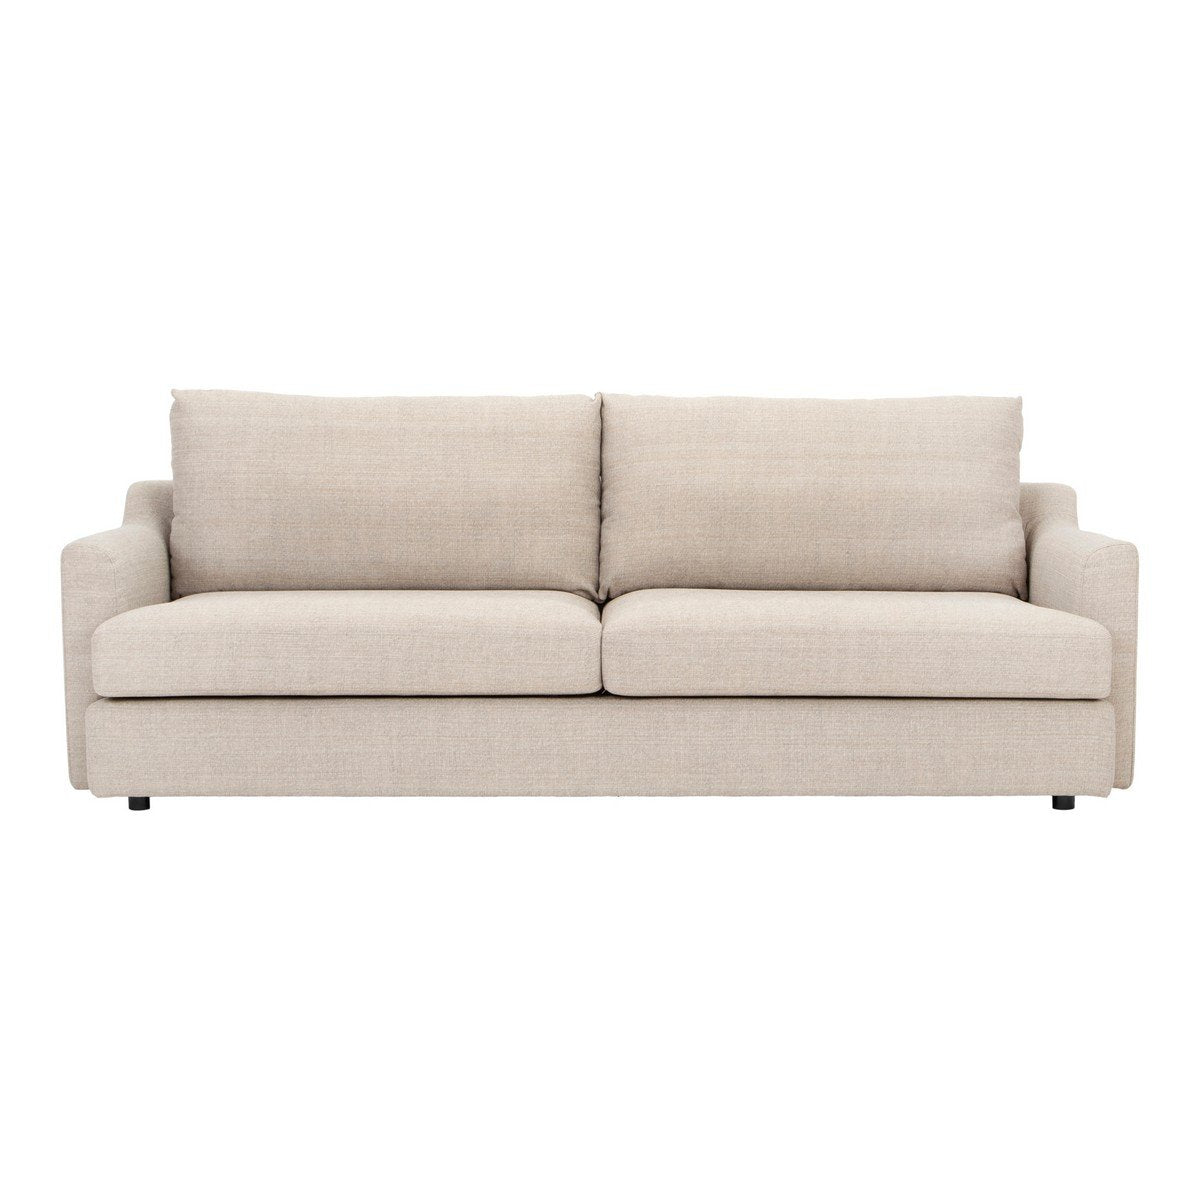 Moe's Home Collection Alvin Sofa - JM-1006-40 - Moe's Home Collection - Sofas - Minimal And Modern - 1